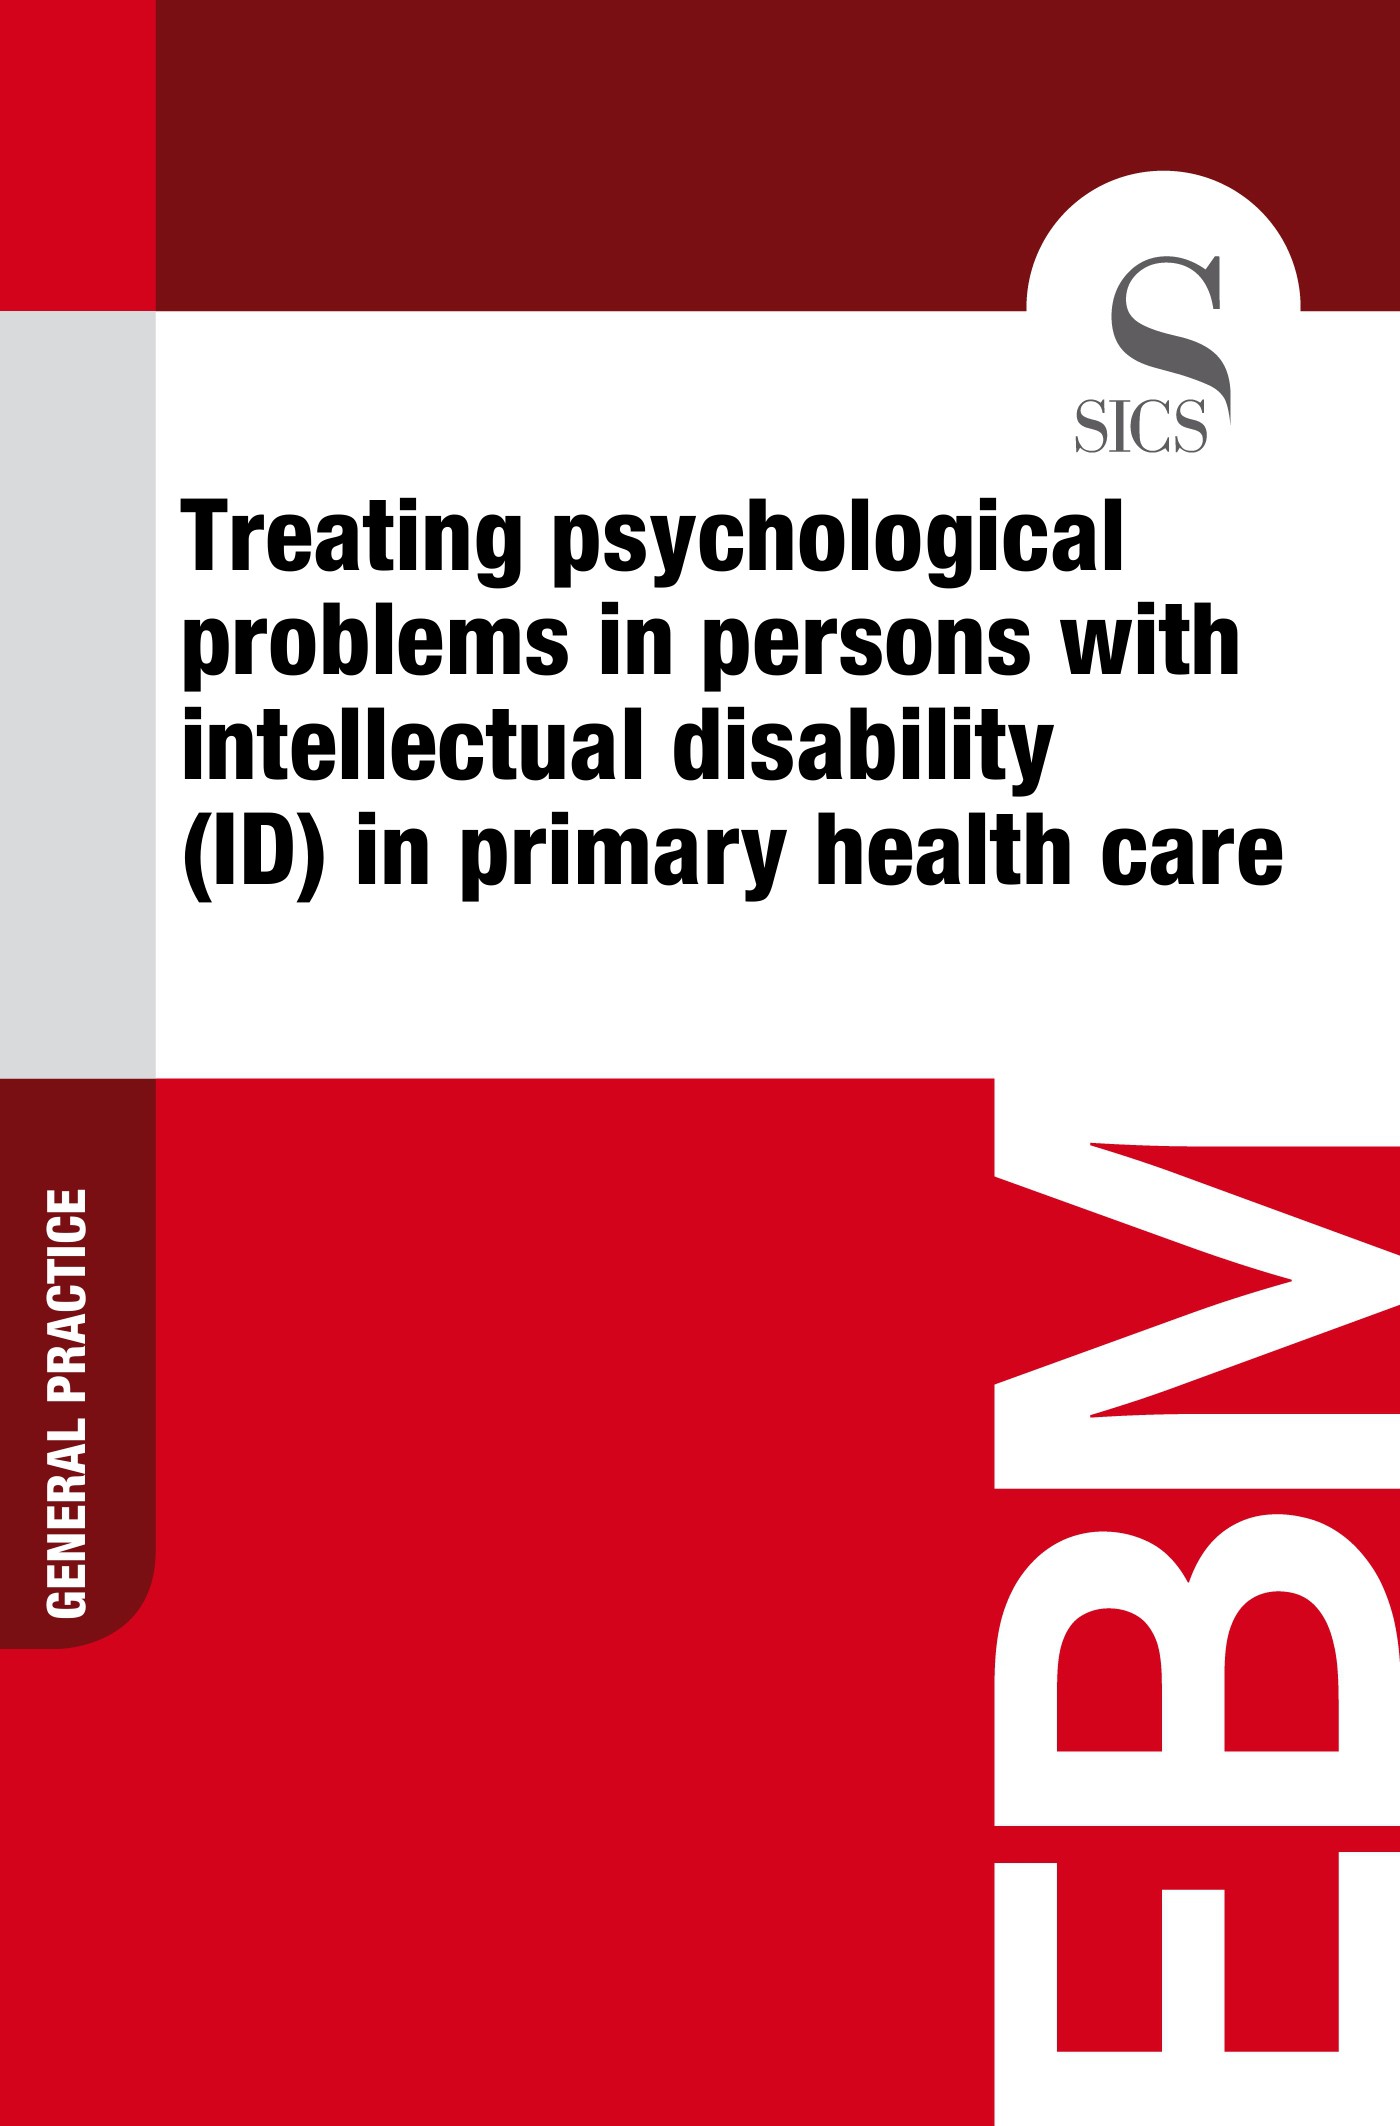 Treating Psychological Problems in Persons with Intellectual Disability (ID) in Primary Health Care - Librerie.coop